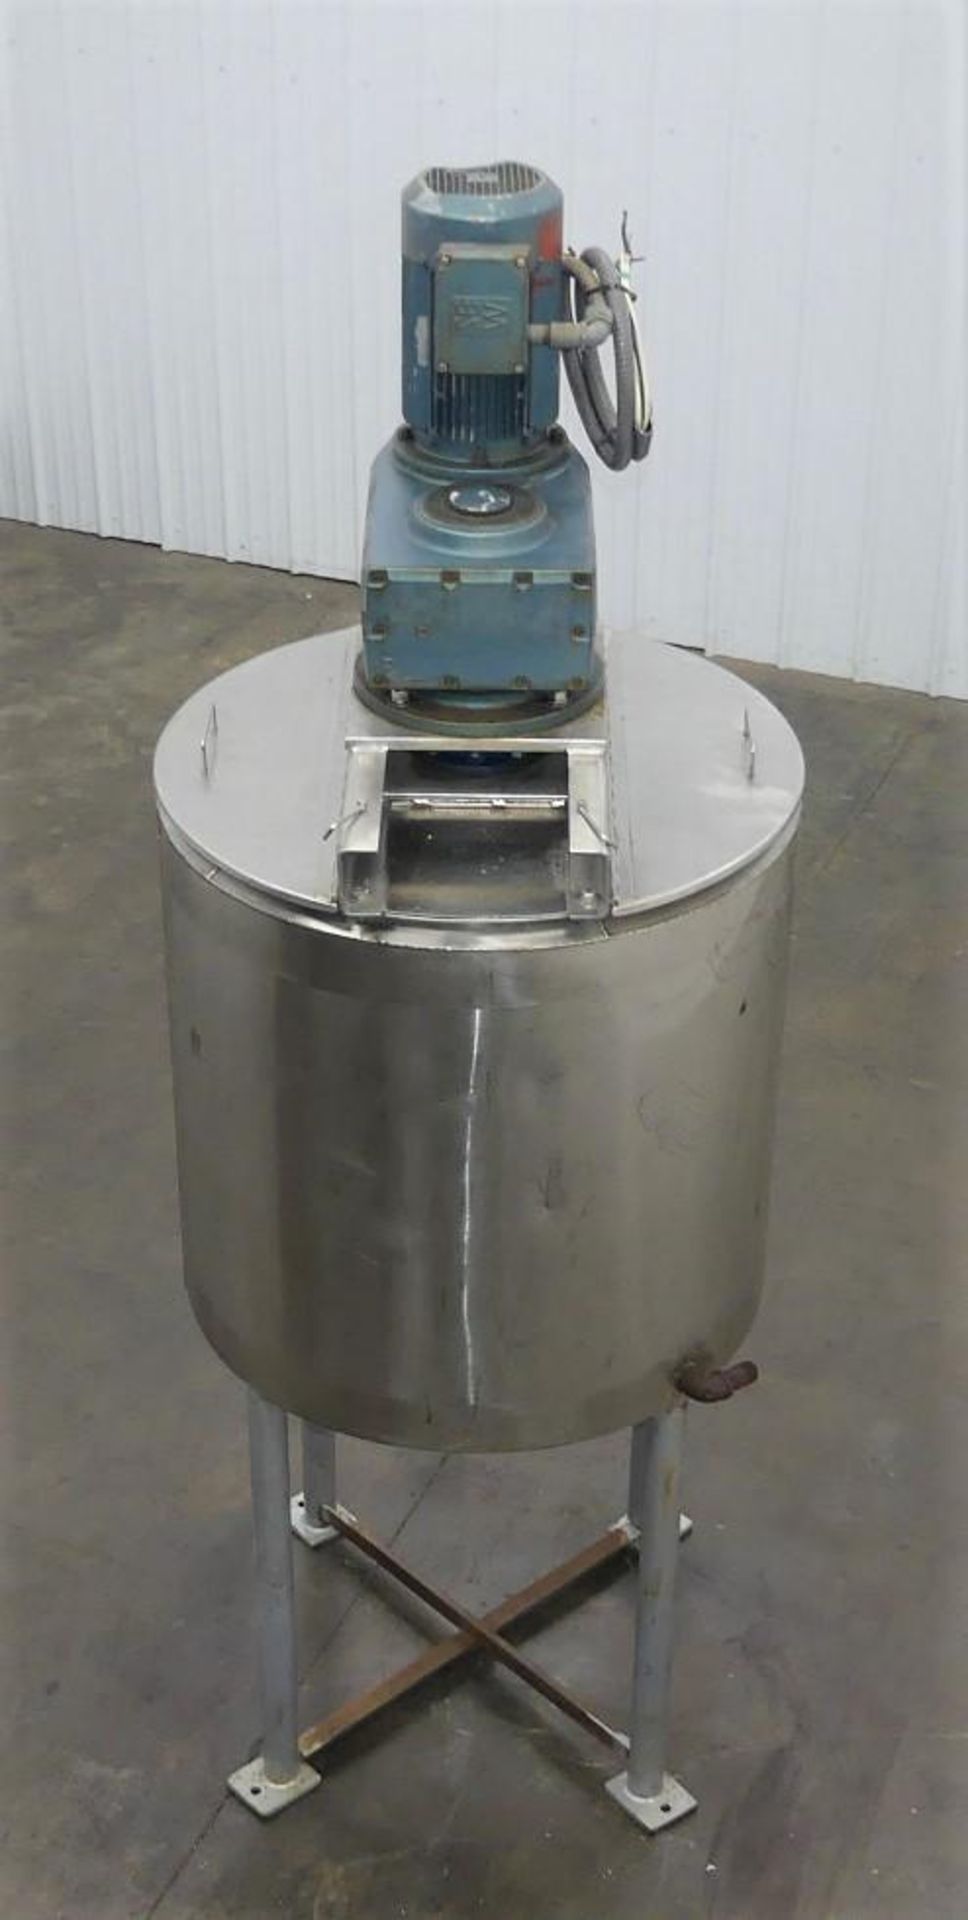 B&G Machine Company 100 Gallon Stainless Steel Jacketed Mixing Tank - Image 4 of 12